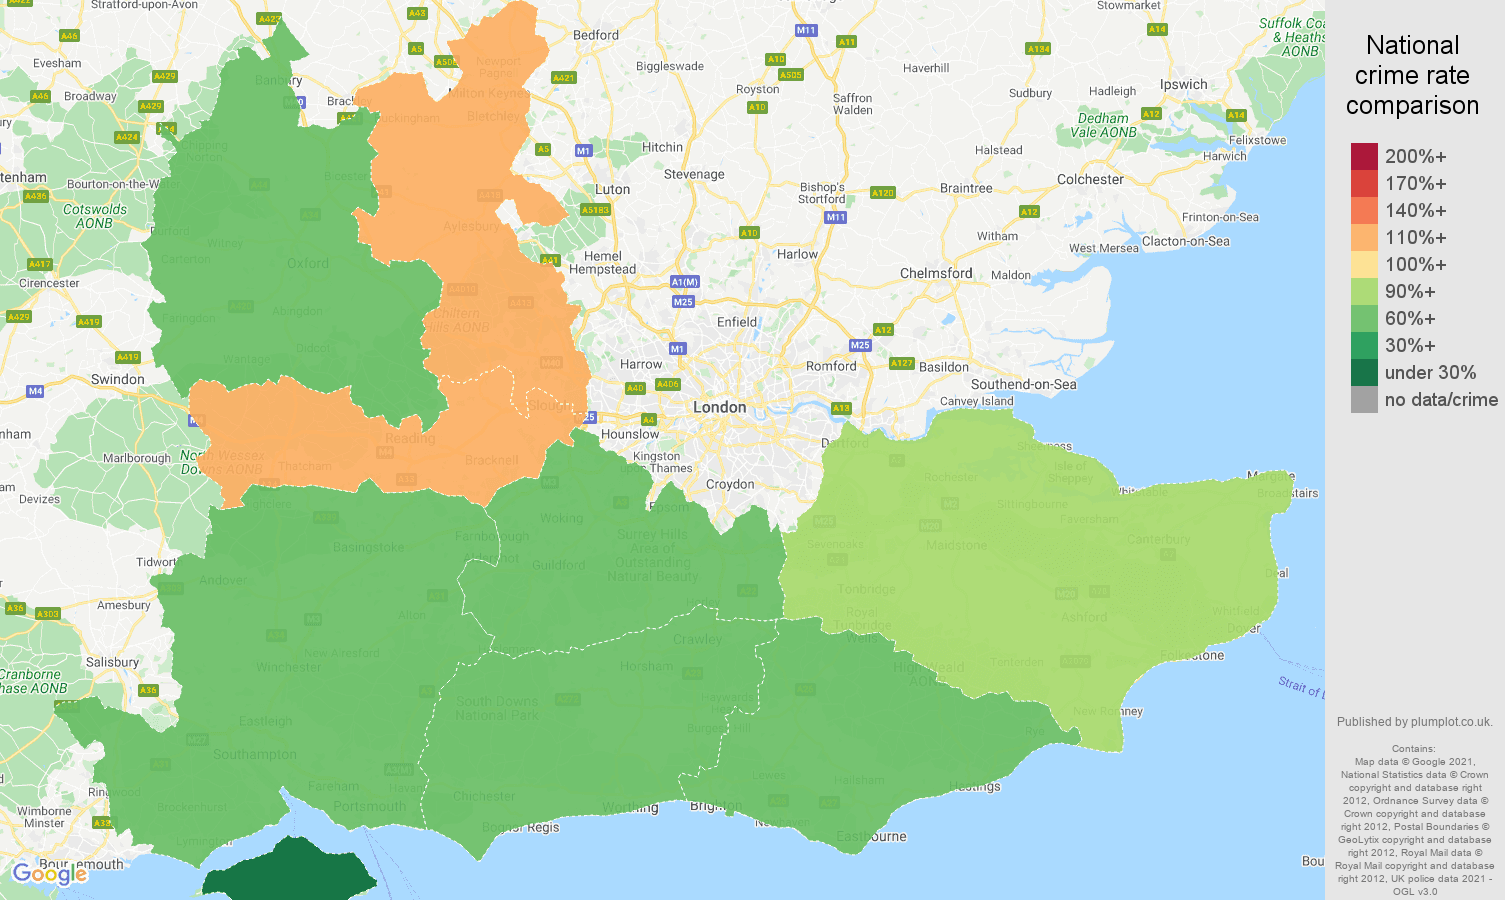 South East vehicle crime rate comparison map